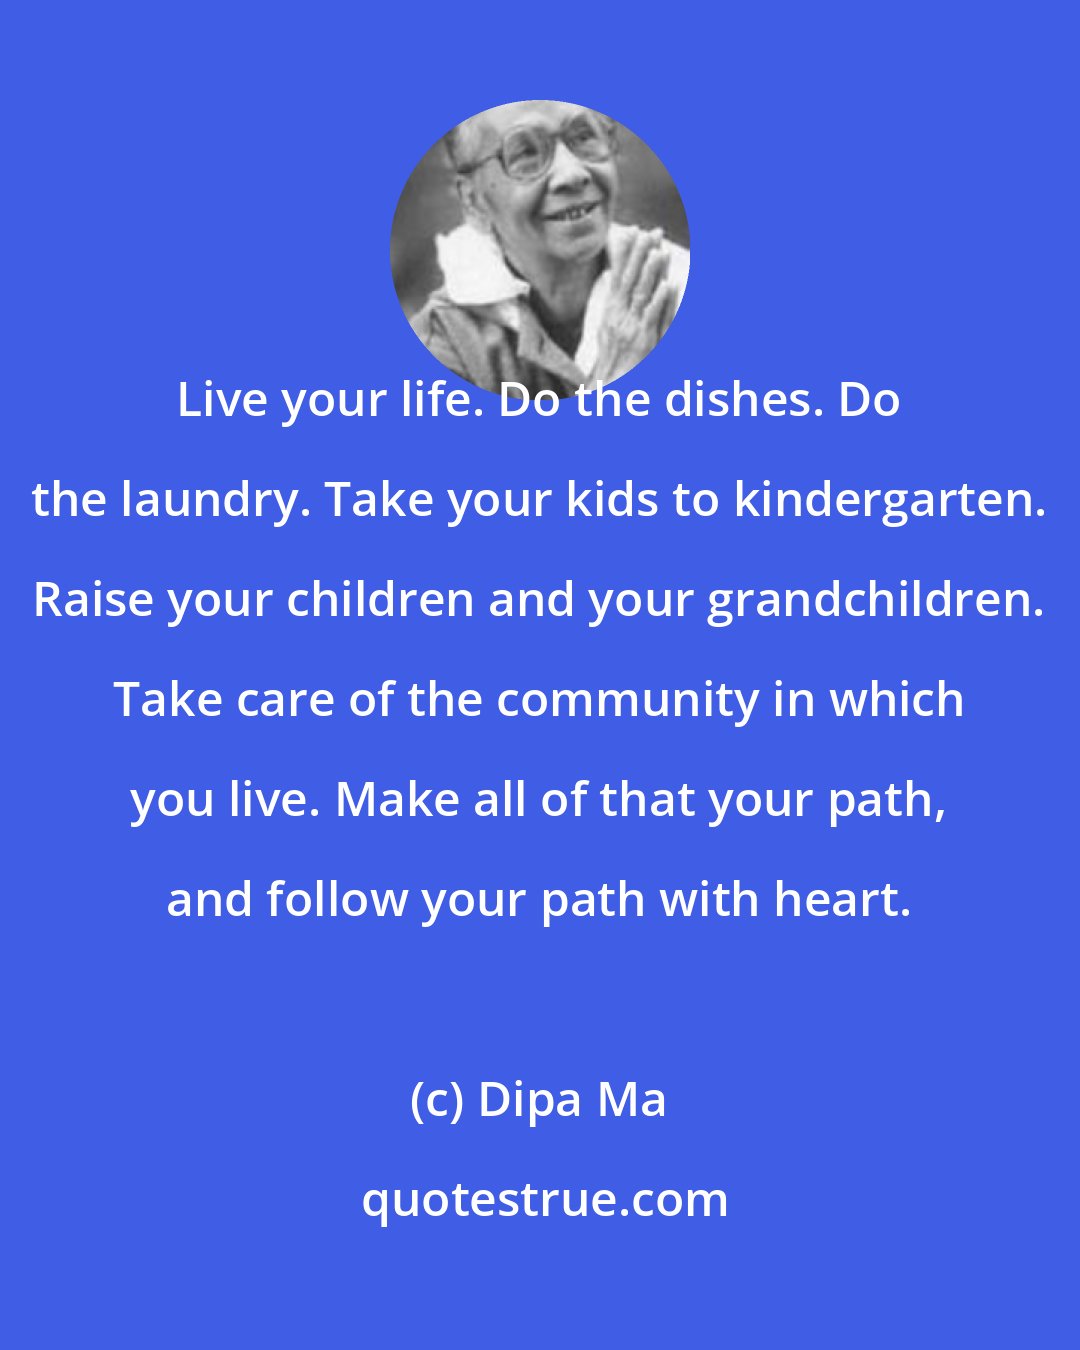 Dipa Ma: Live your life. Do the dishes. Do the laundry. Take your kids to kindergarten. Raise your children and your grandchildren. Take care of the community in which you live. Make all of that your path, and follow your path with heart.